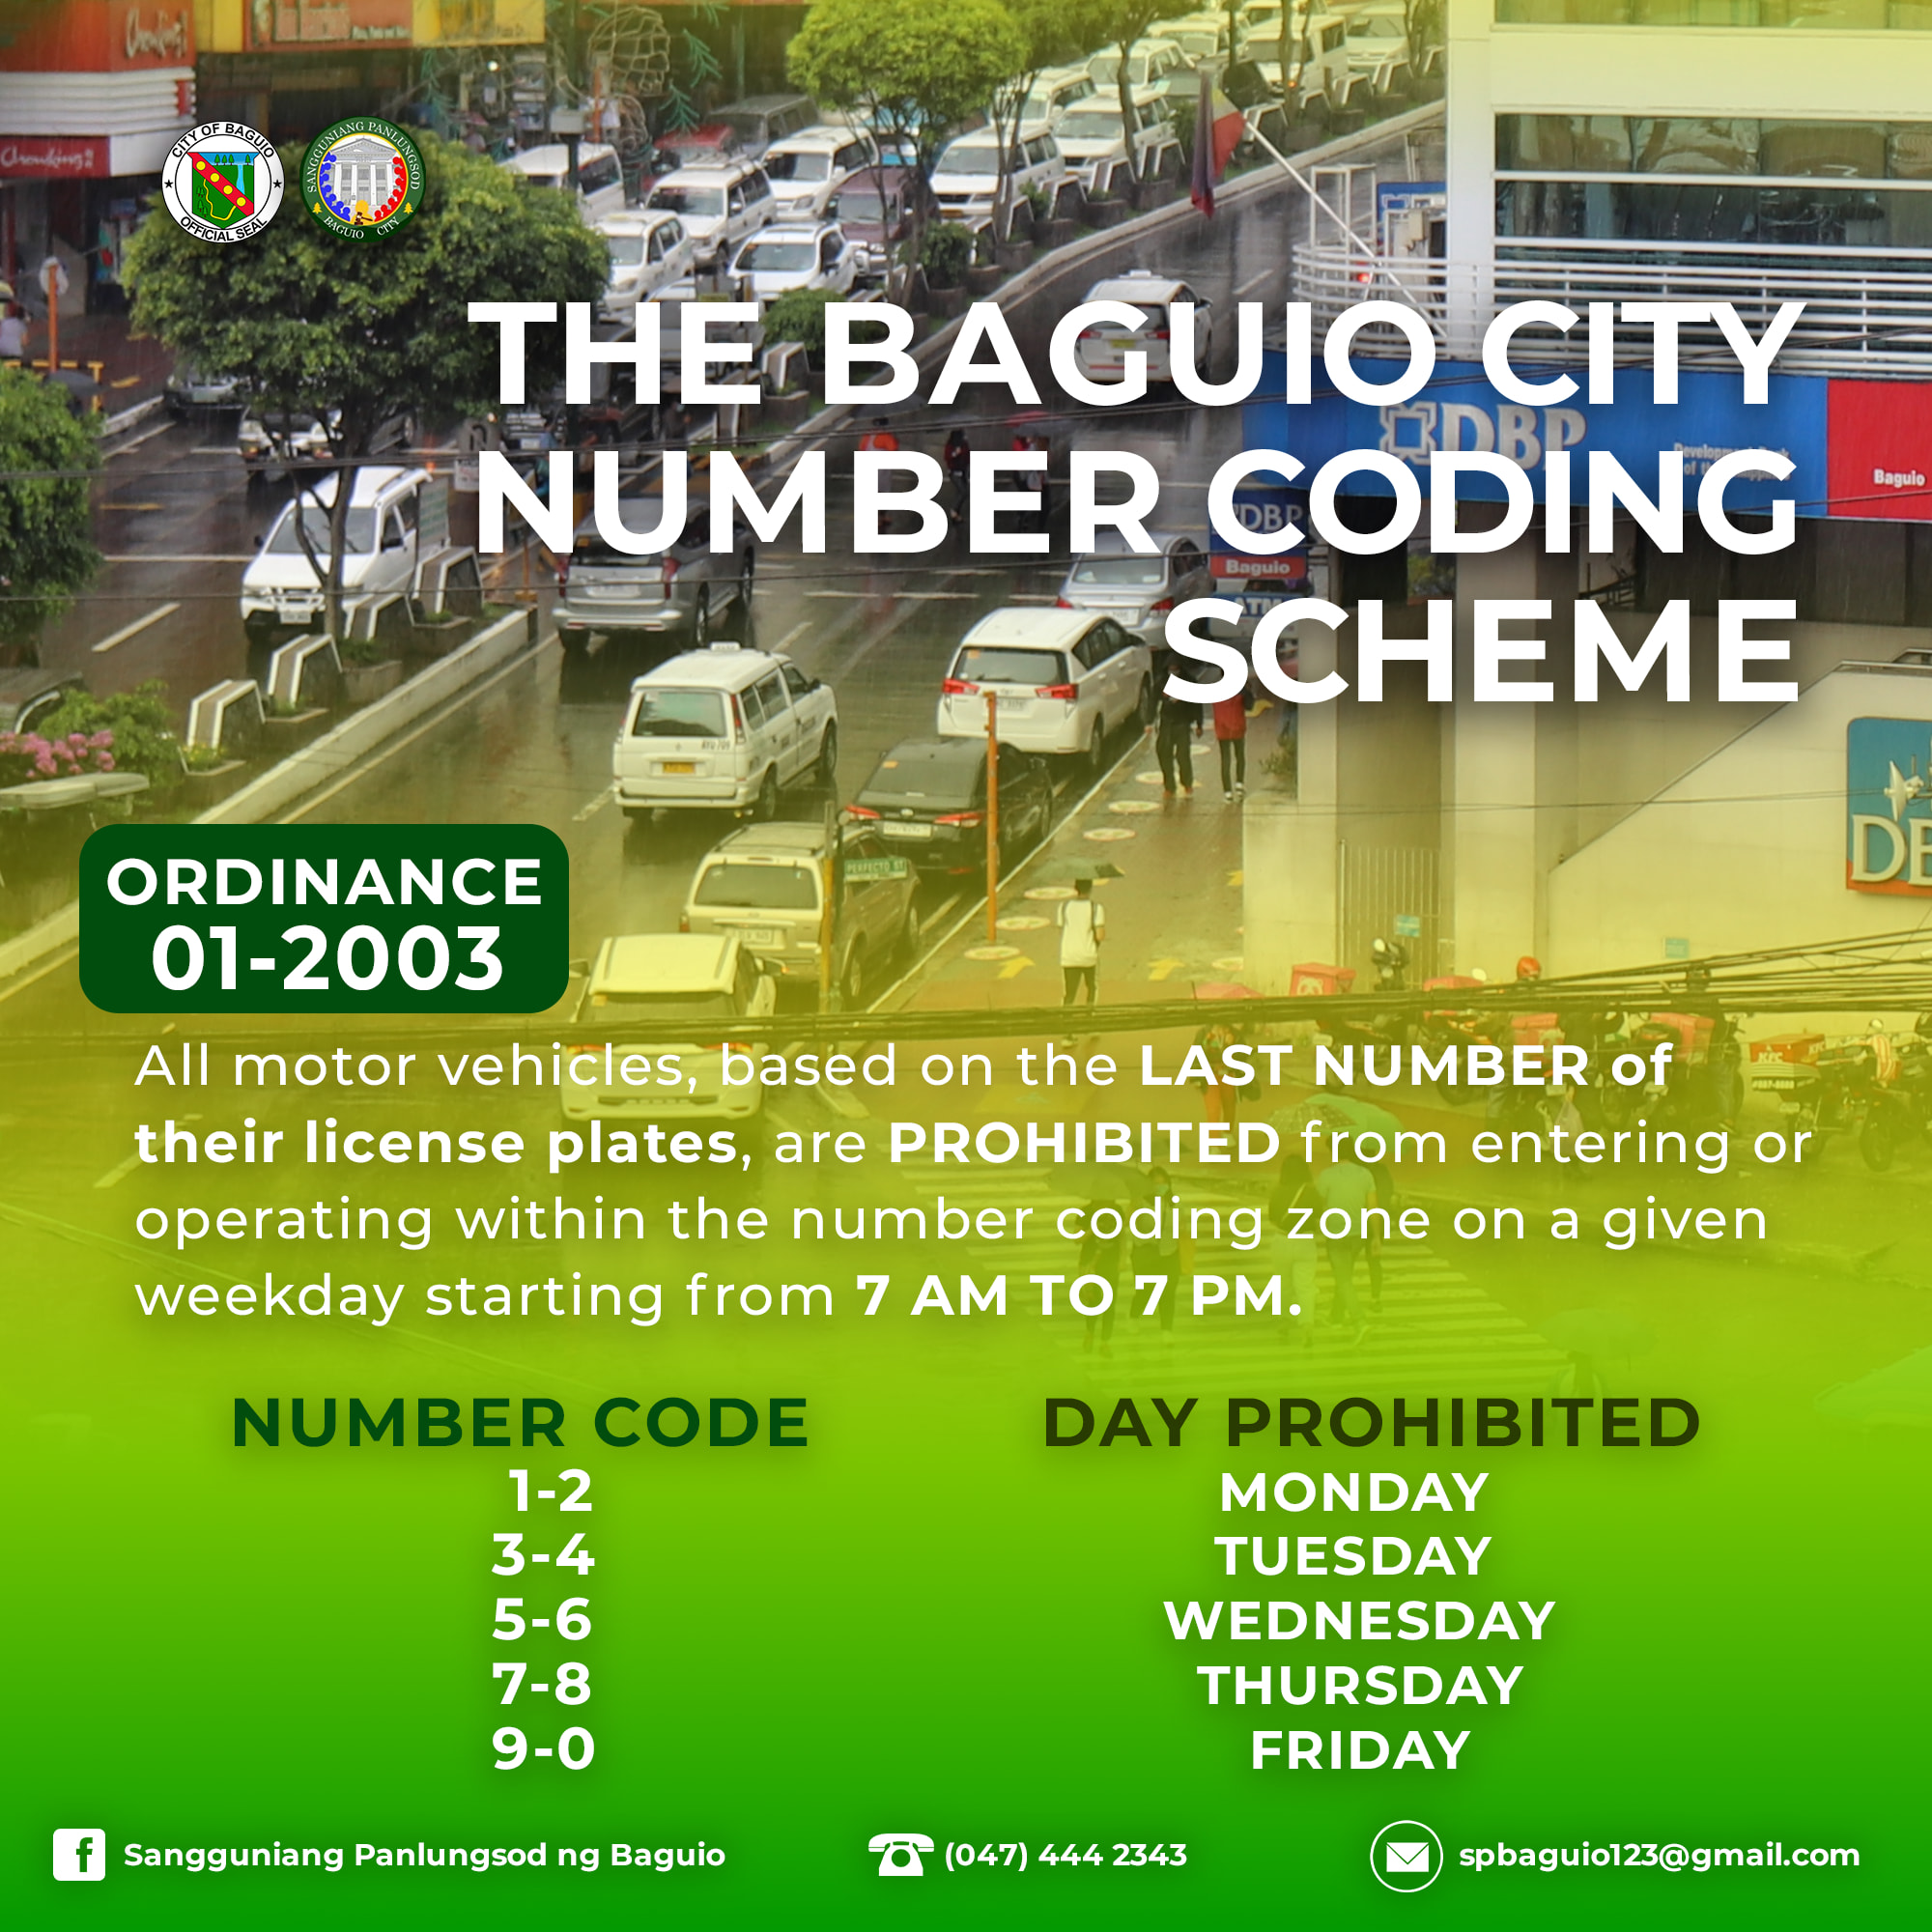 Important Reminders To All Who Plan to Visit Baguio City